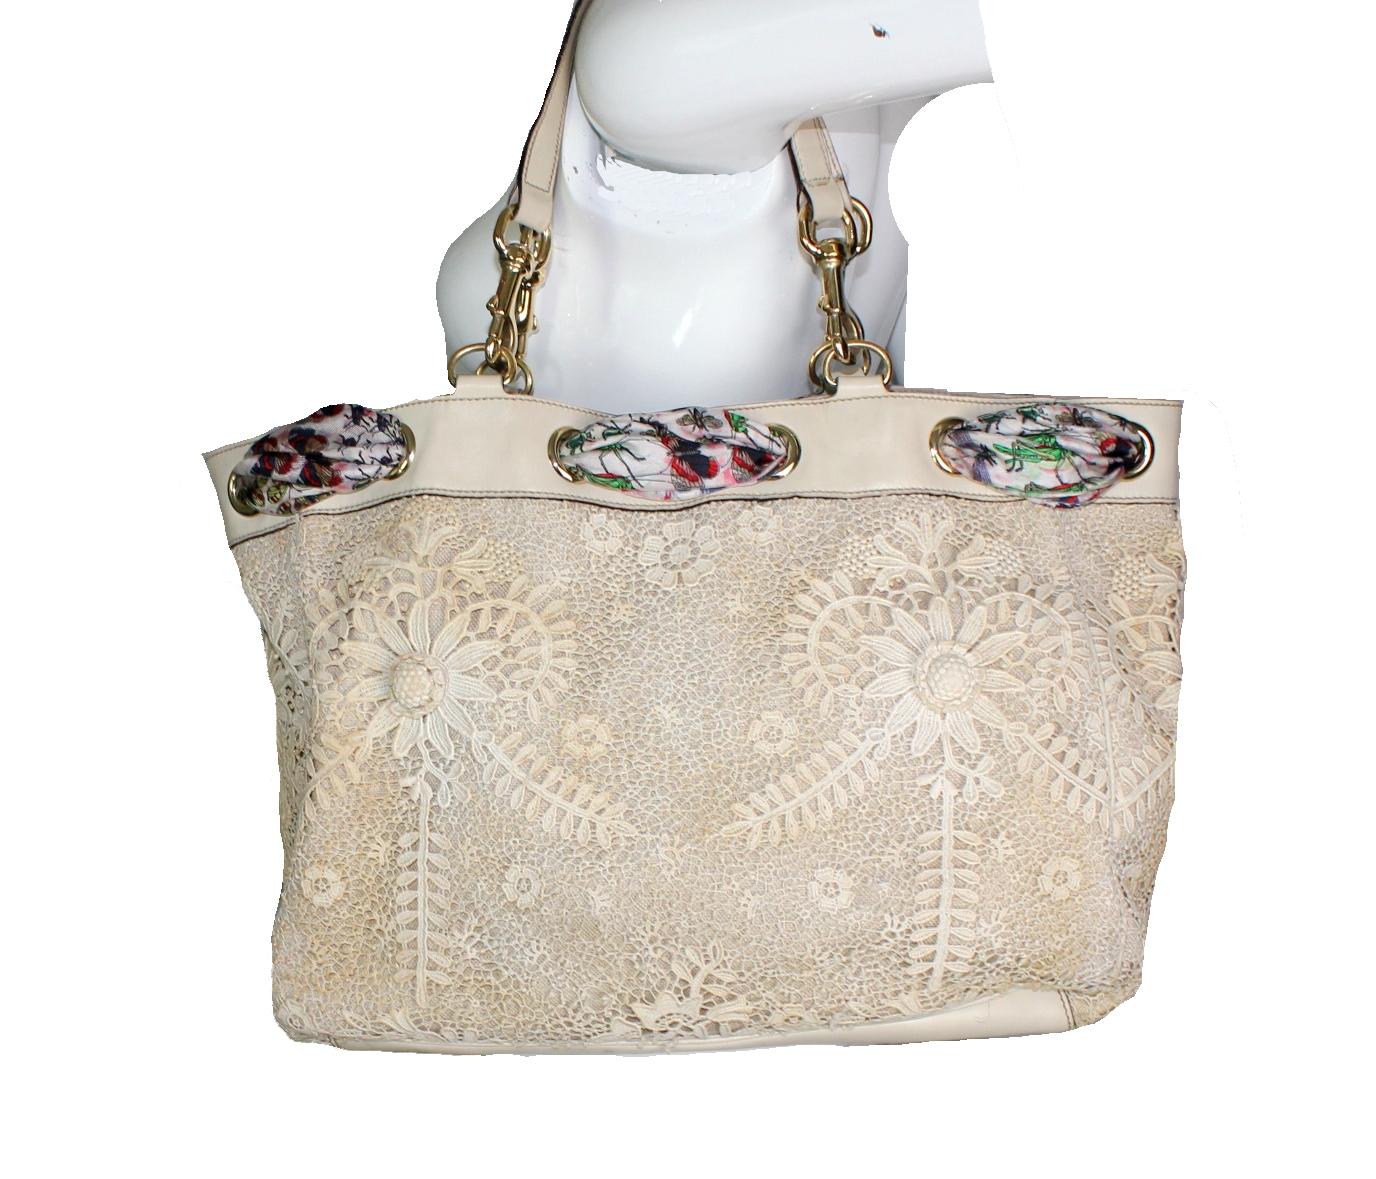 Gucci Woven Lace & Flora Print Silk Tote Bag 

Limited Editon - Only a Few Pieces Were Produced Of This Gorgeous Bag And Sold In Flagship Stores  

Details: 

Made of macrame lace, leather & printed silk fabric with hand-stitched hem
Beautiful print